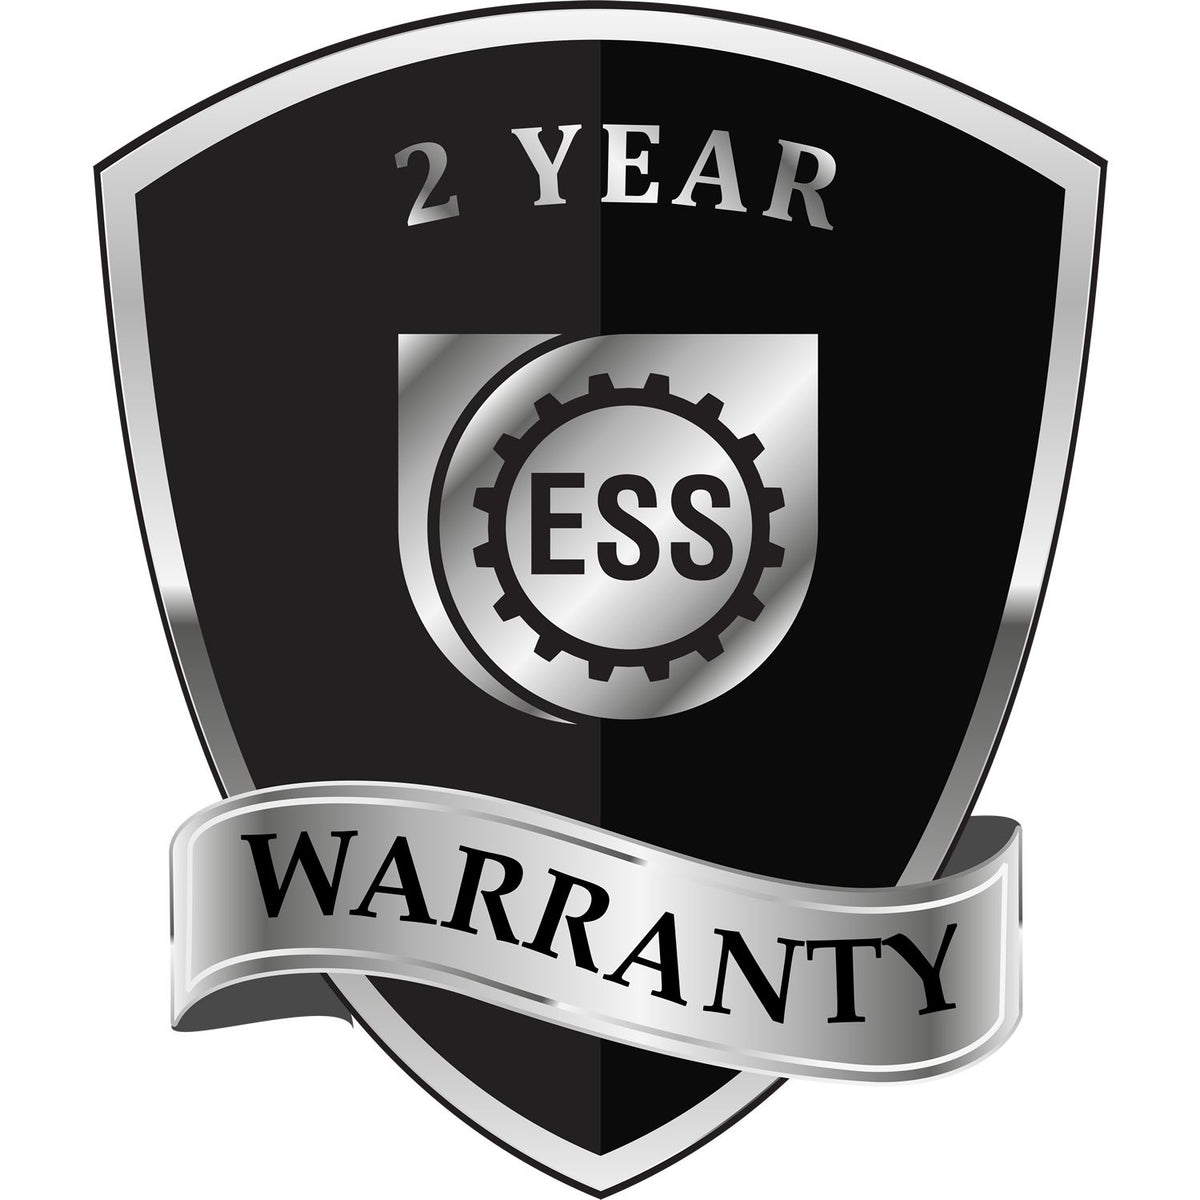 A black and silver badge or emblem showing warranty information for the Hybrid Maine Architect Seal